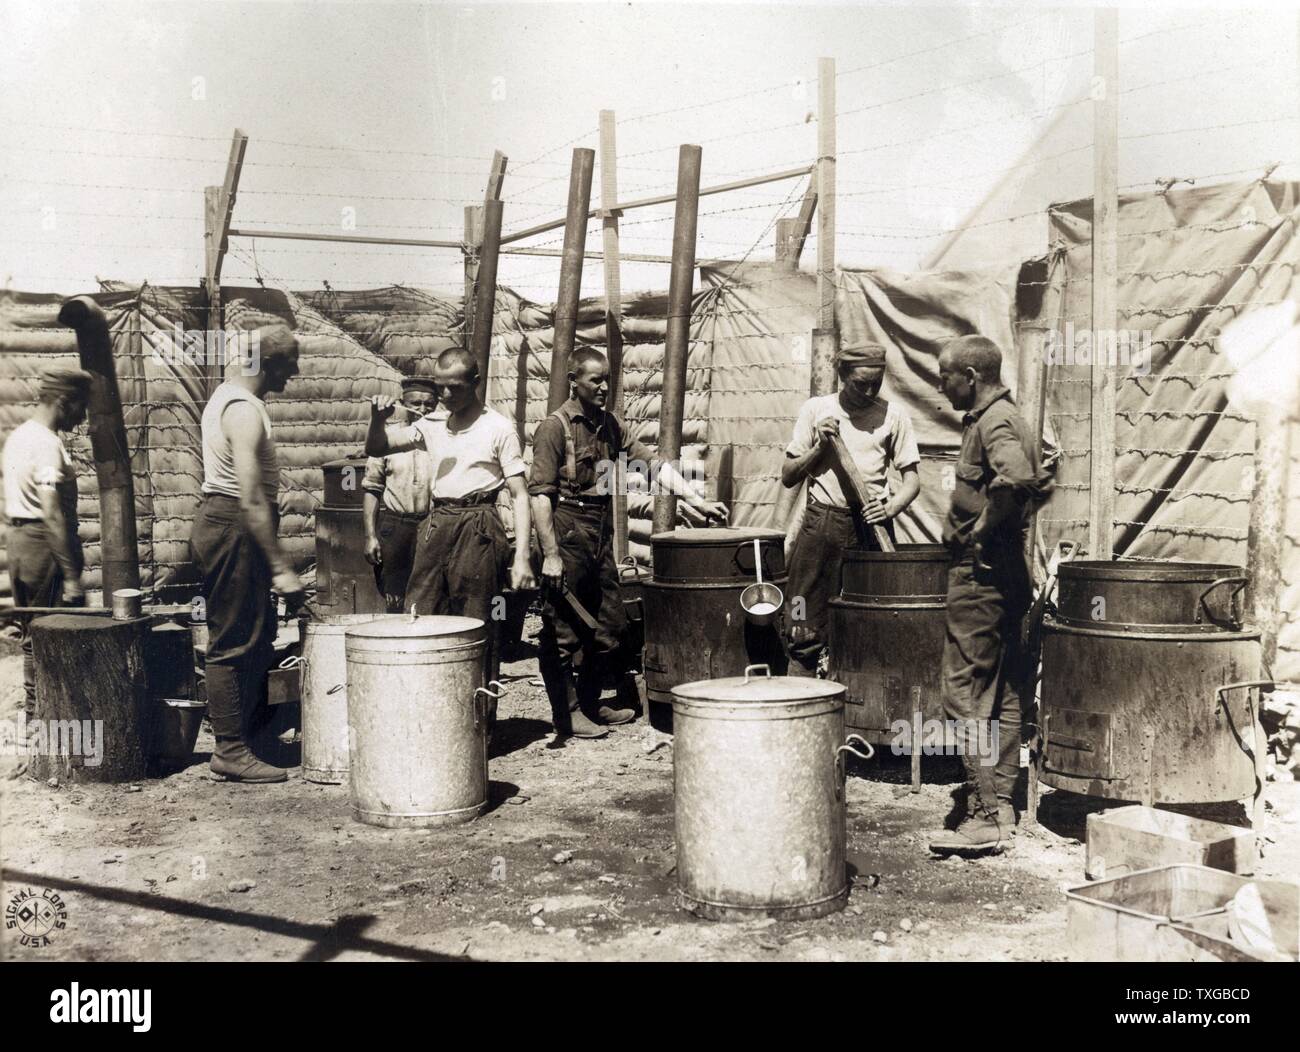 The open air kitchen used by German prisoners while a new mess hall and kitchen is being erected Camp Miramas, near Marseilles, France. Photograph shows German prisoners of war cooking in large pots in outdoor kitchen. Stock Photo